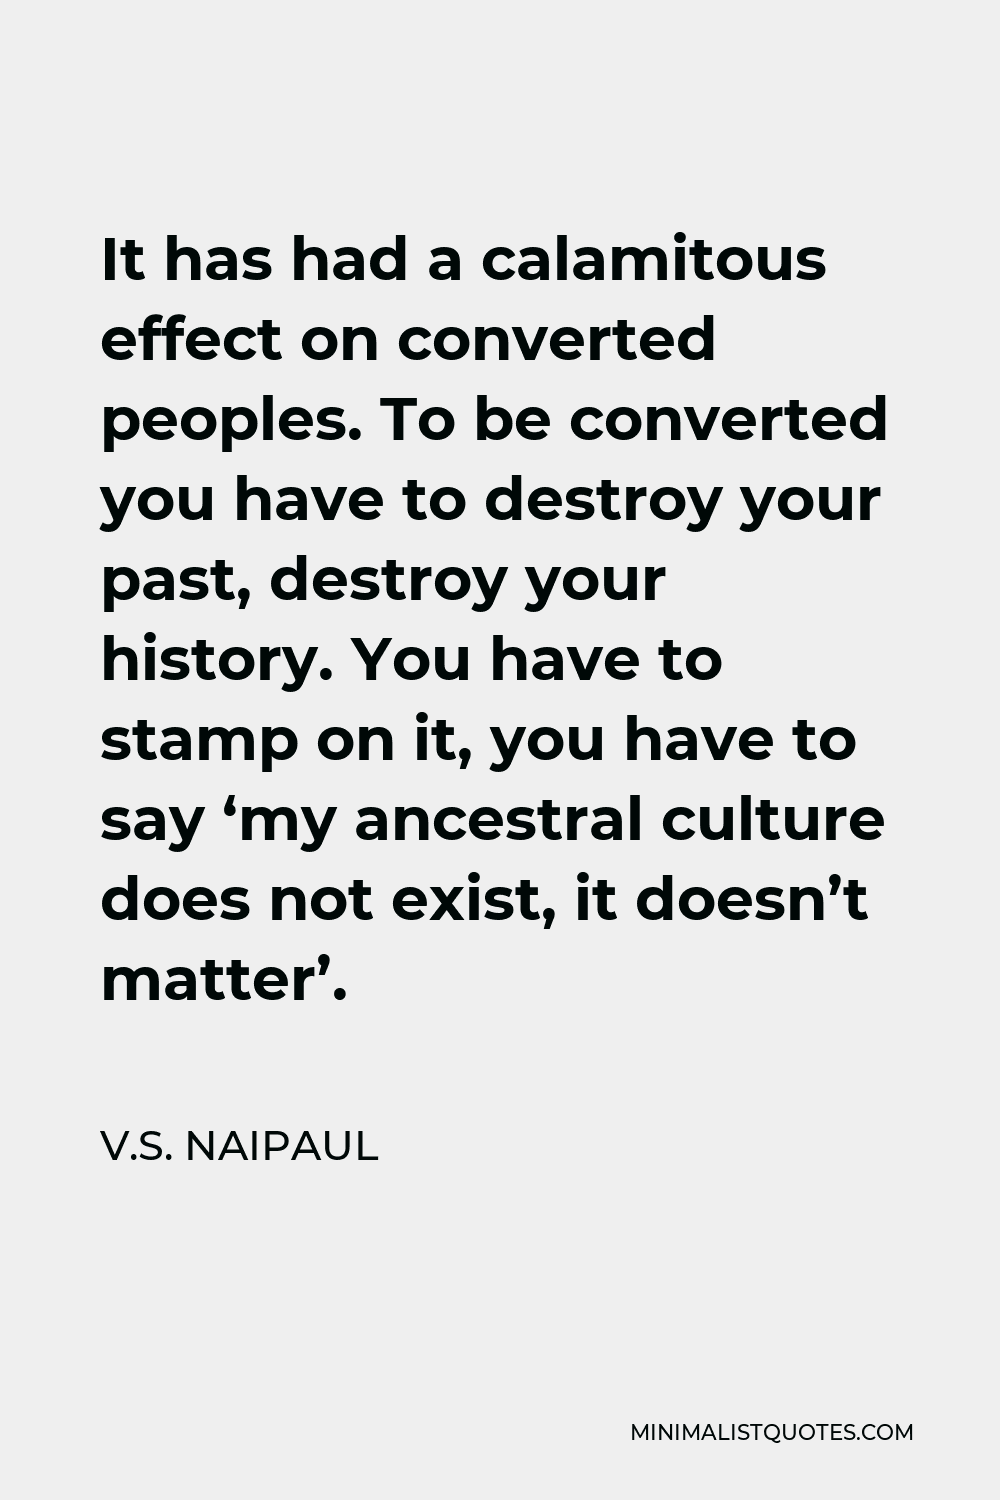 V.S. Naipaul Quote - It has had a calamitous effect on converted peoples. To be converted you have to destroy your past, destroy your history. You have to stamp on it, you have to say ‘my ancestral culture does not exist, it doesn’t matter’.